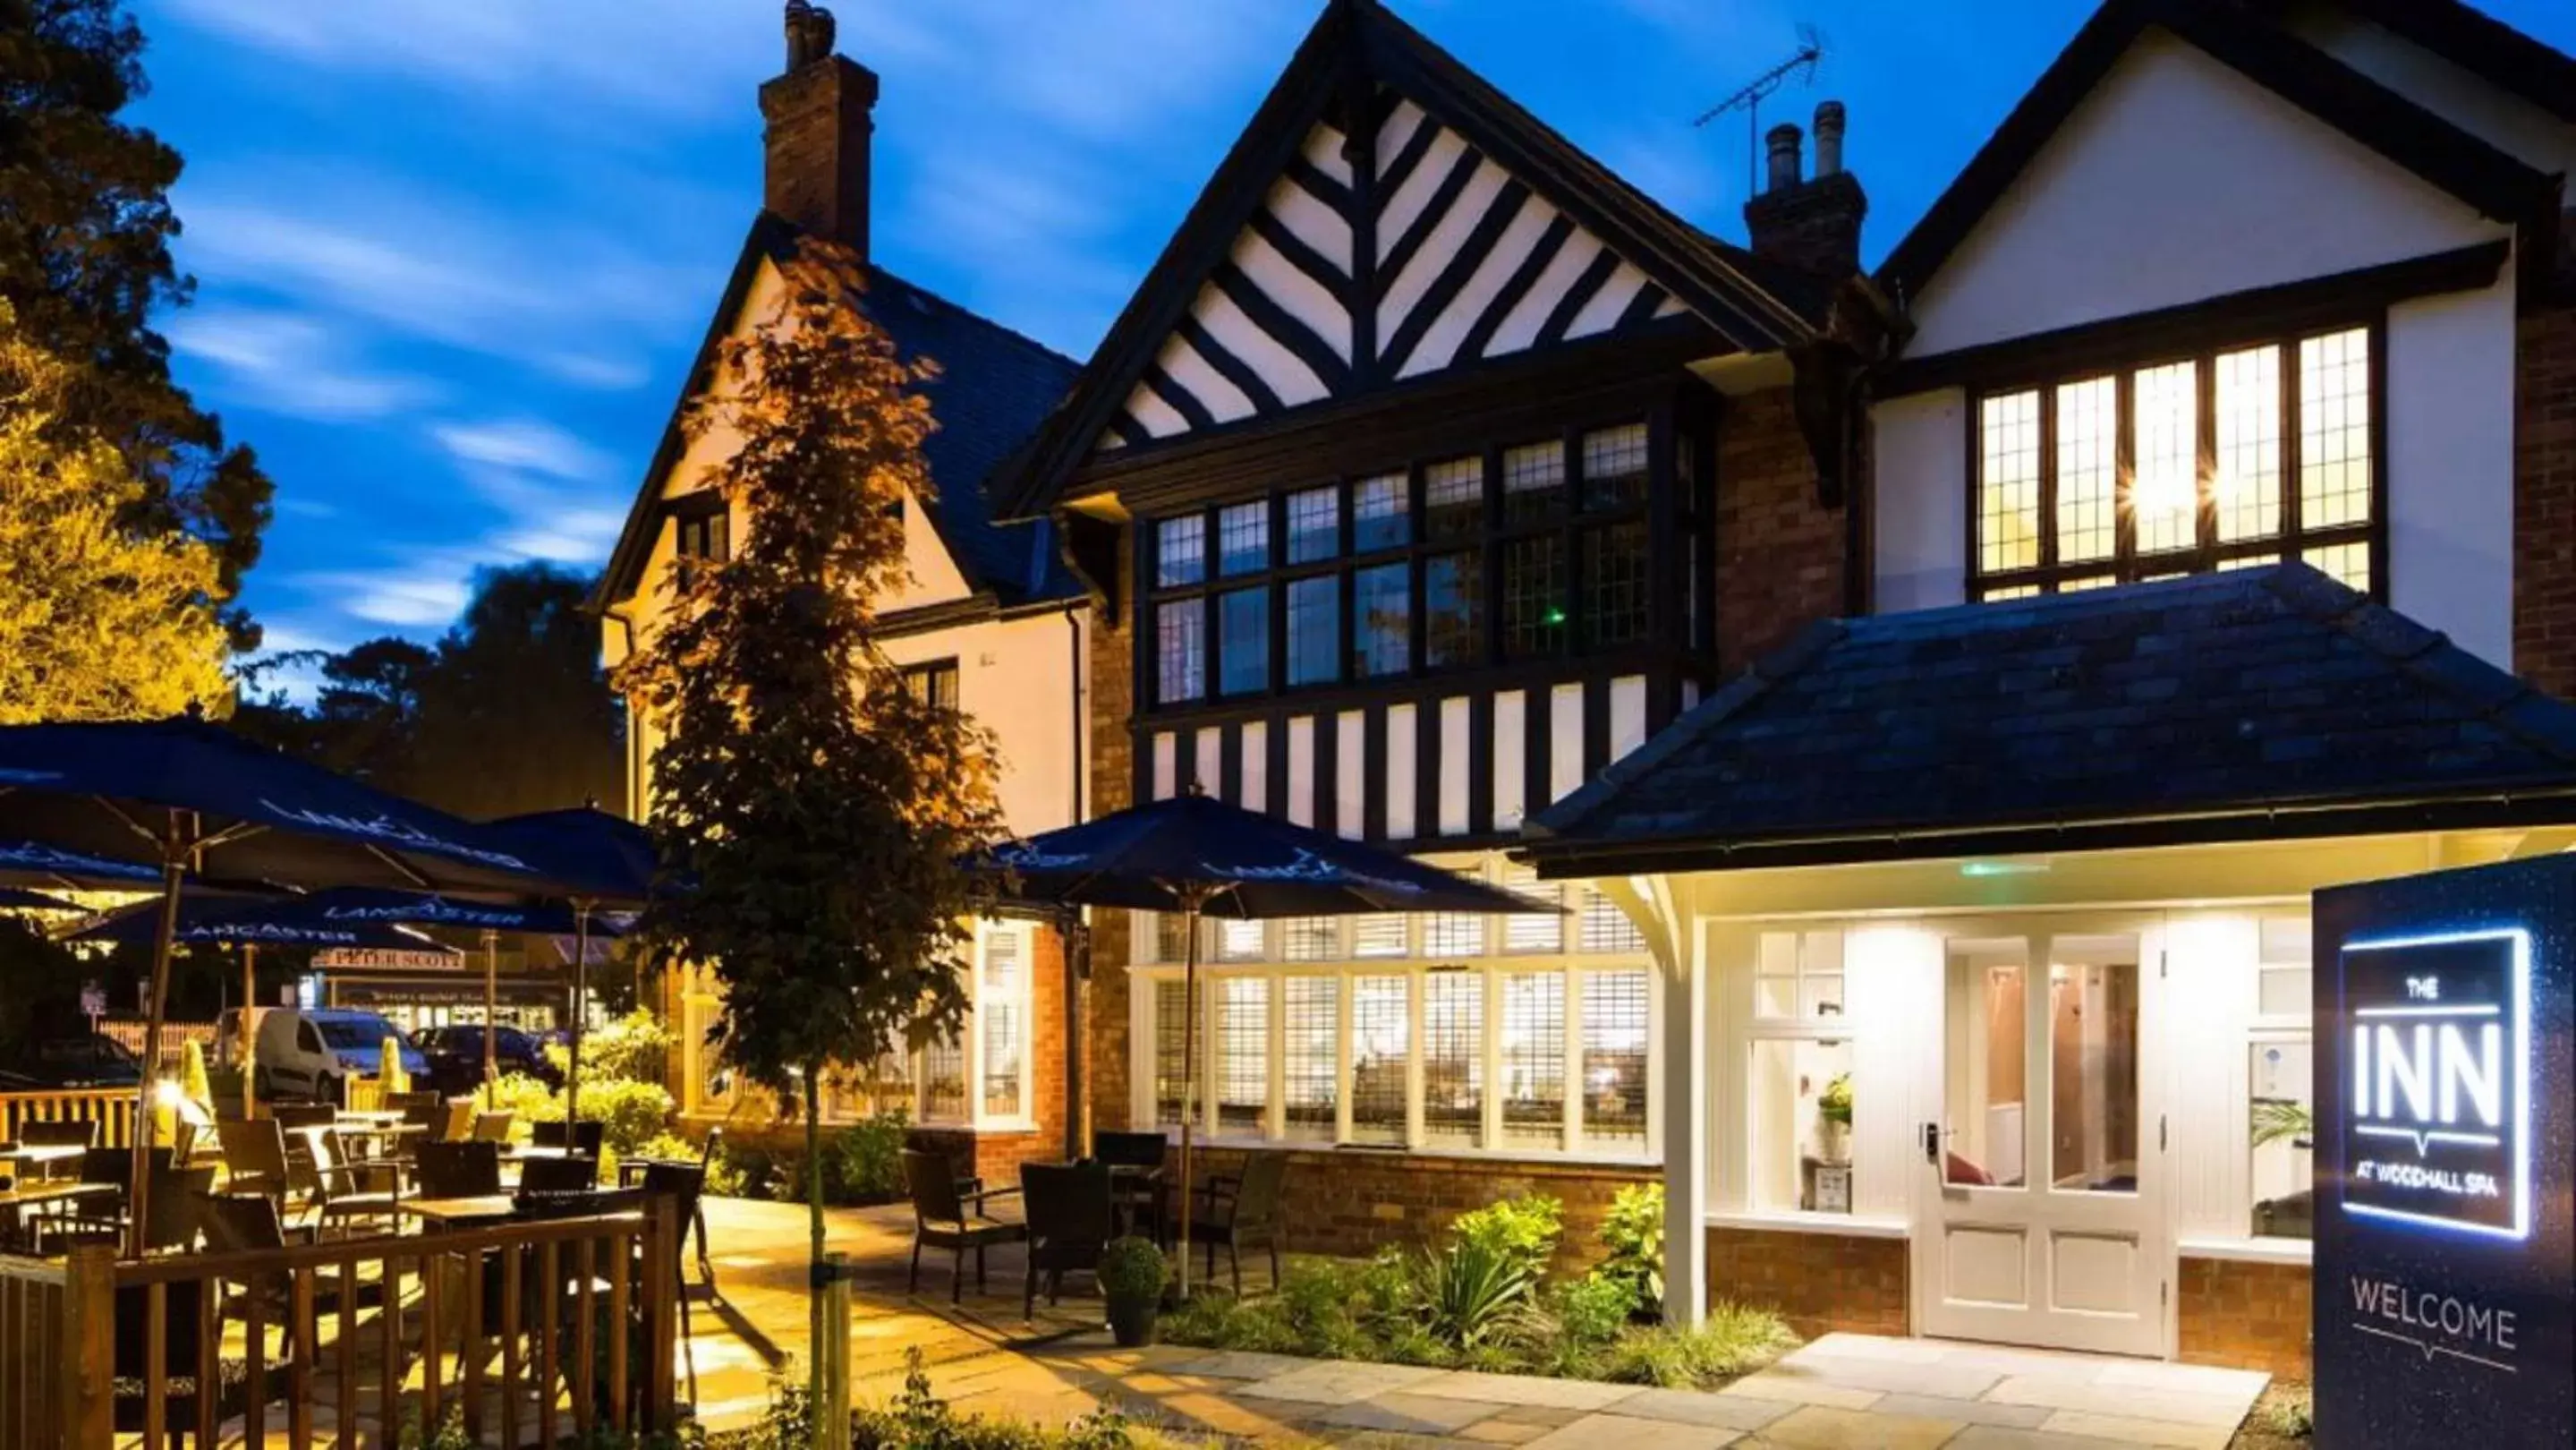 Property Building in The Inn at Woodhall Spa